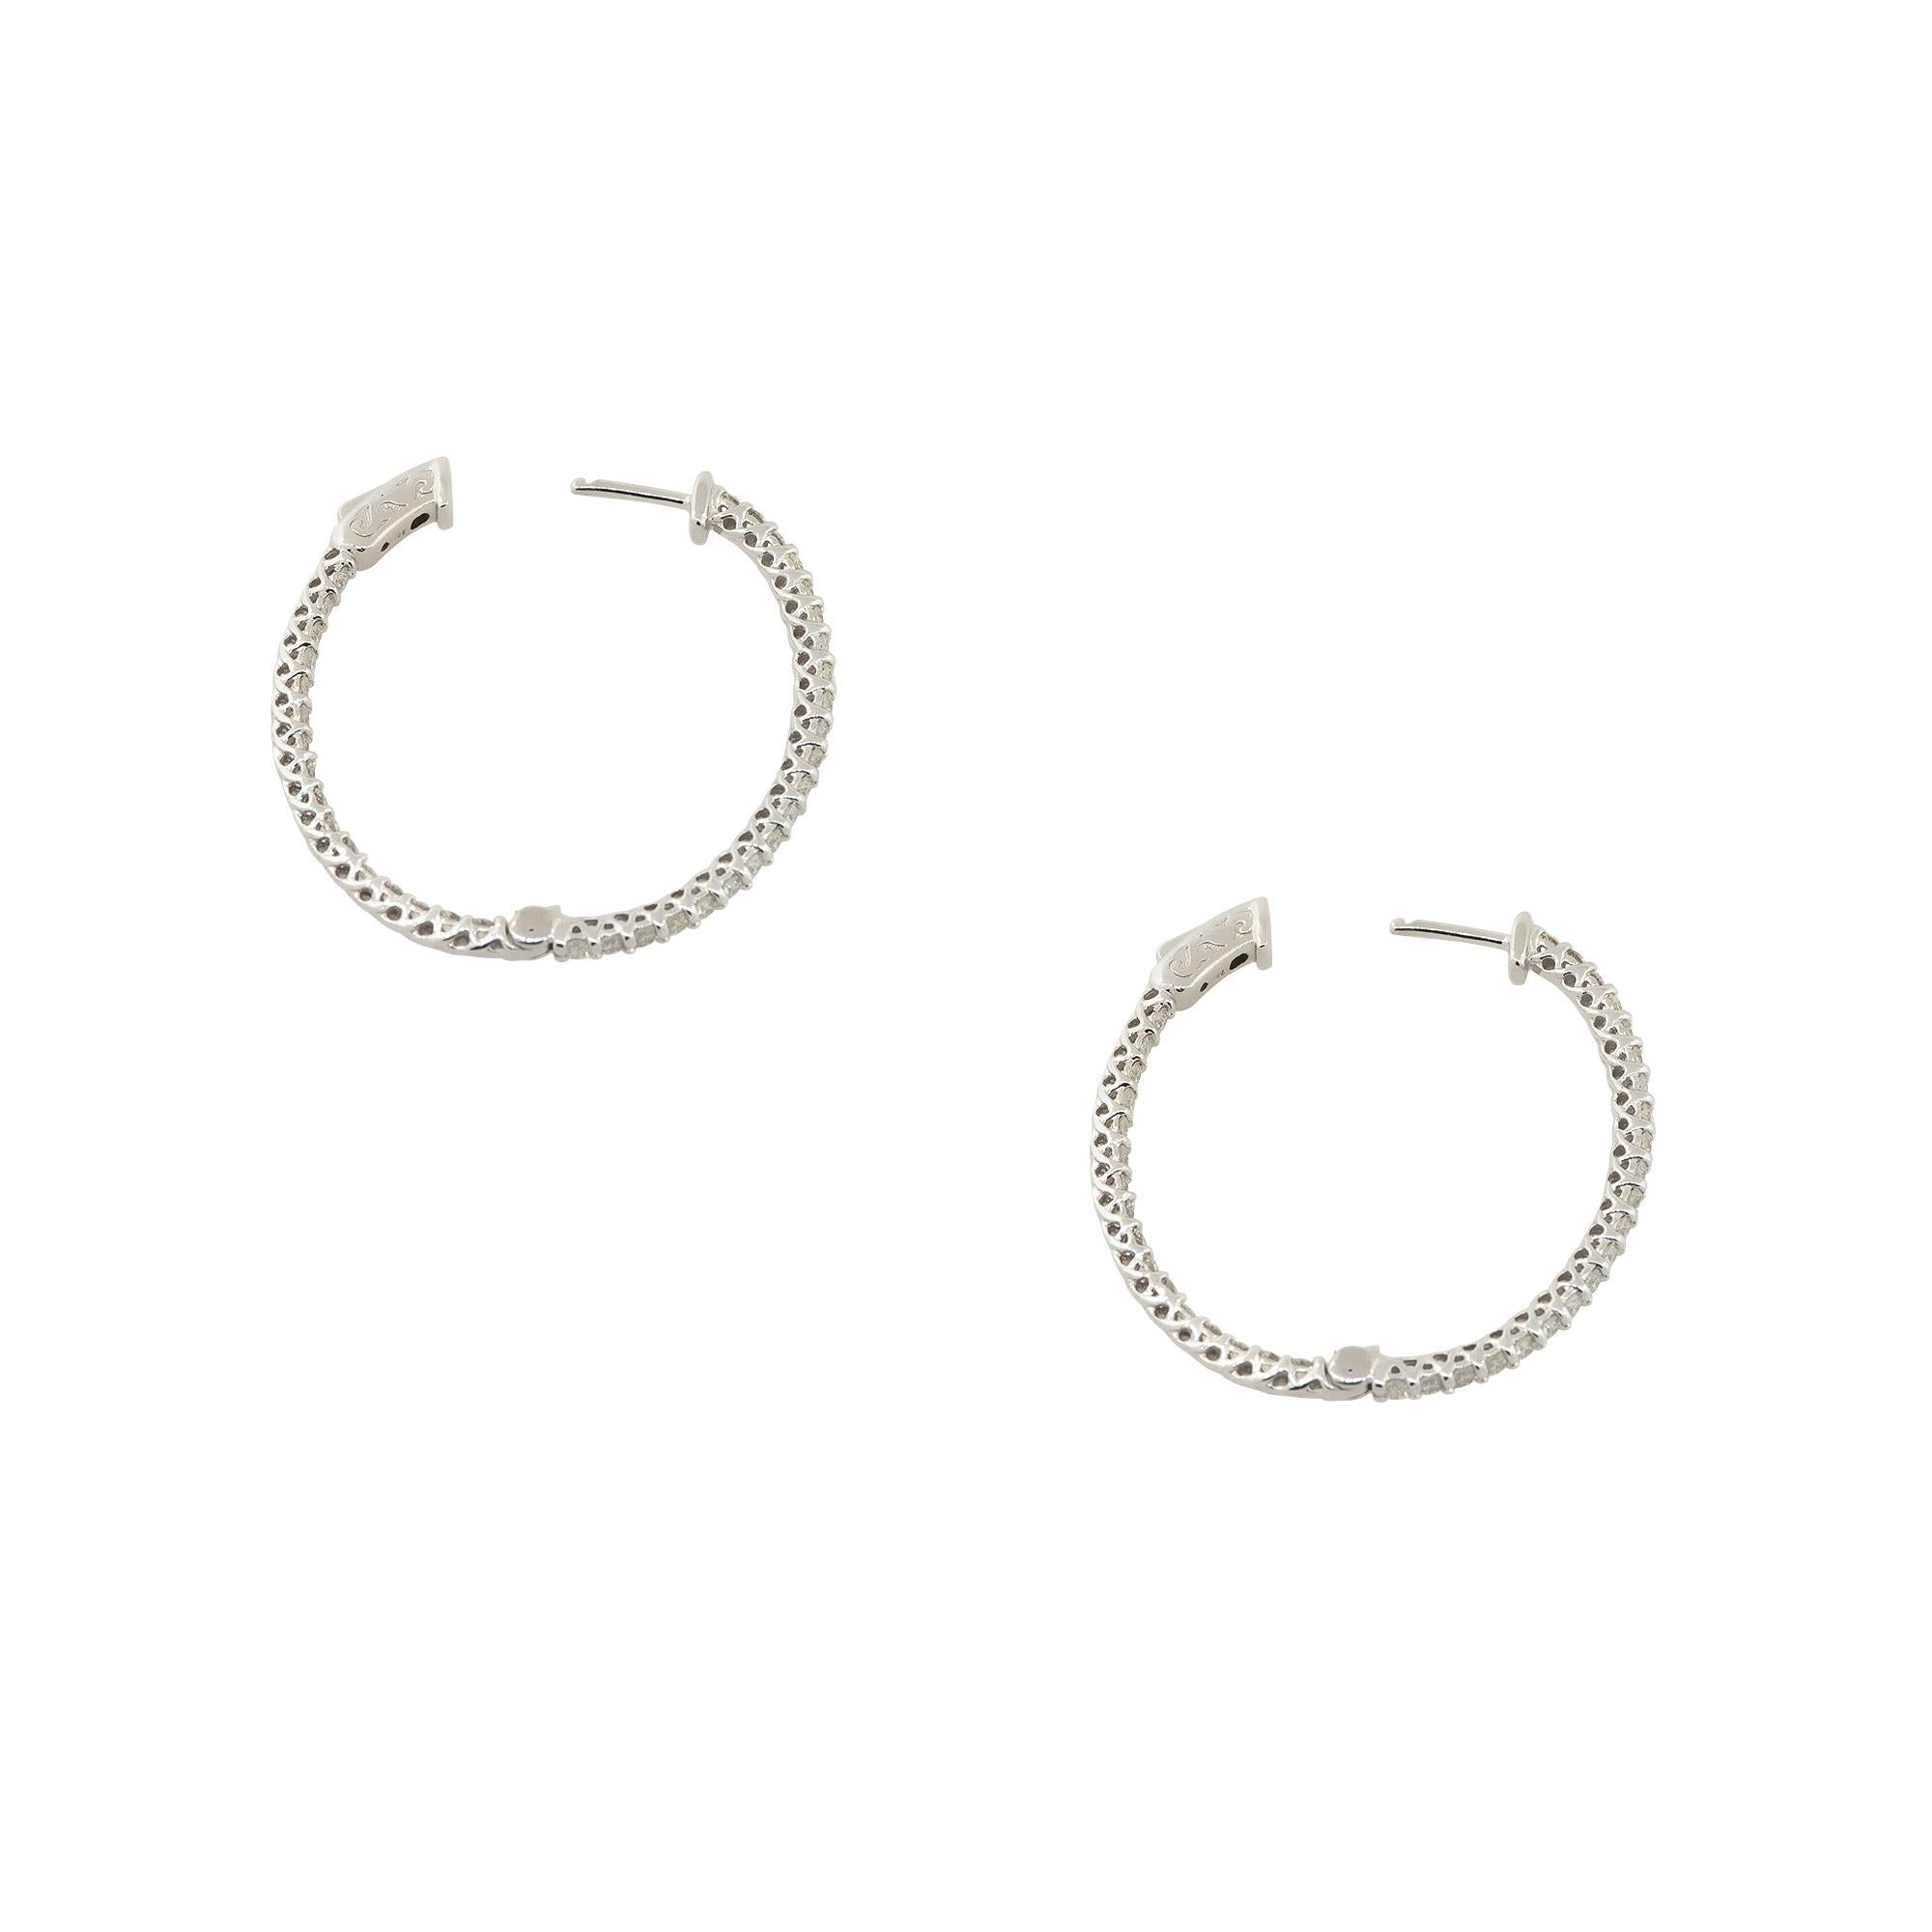 14k White Gold 2.12ctw Diamond Inside-Out Oval Hoop Earrings

Style: Oval Shaped Inside Out Hoop Earrings
Material: 14k White Gold
Diamond Details: Approximately 2.12ctw of Round Brilliant Cut Diamonds. Diamonds are set inside-out of the